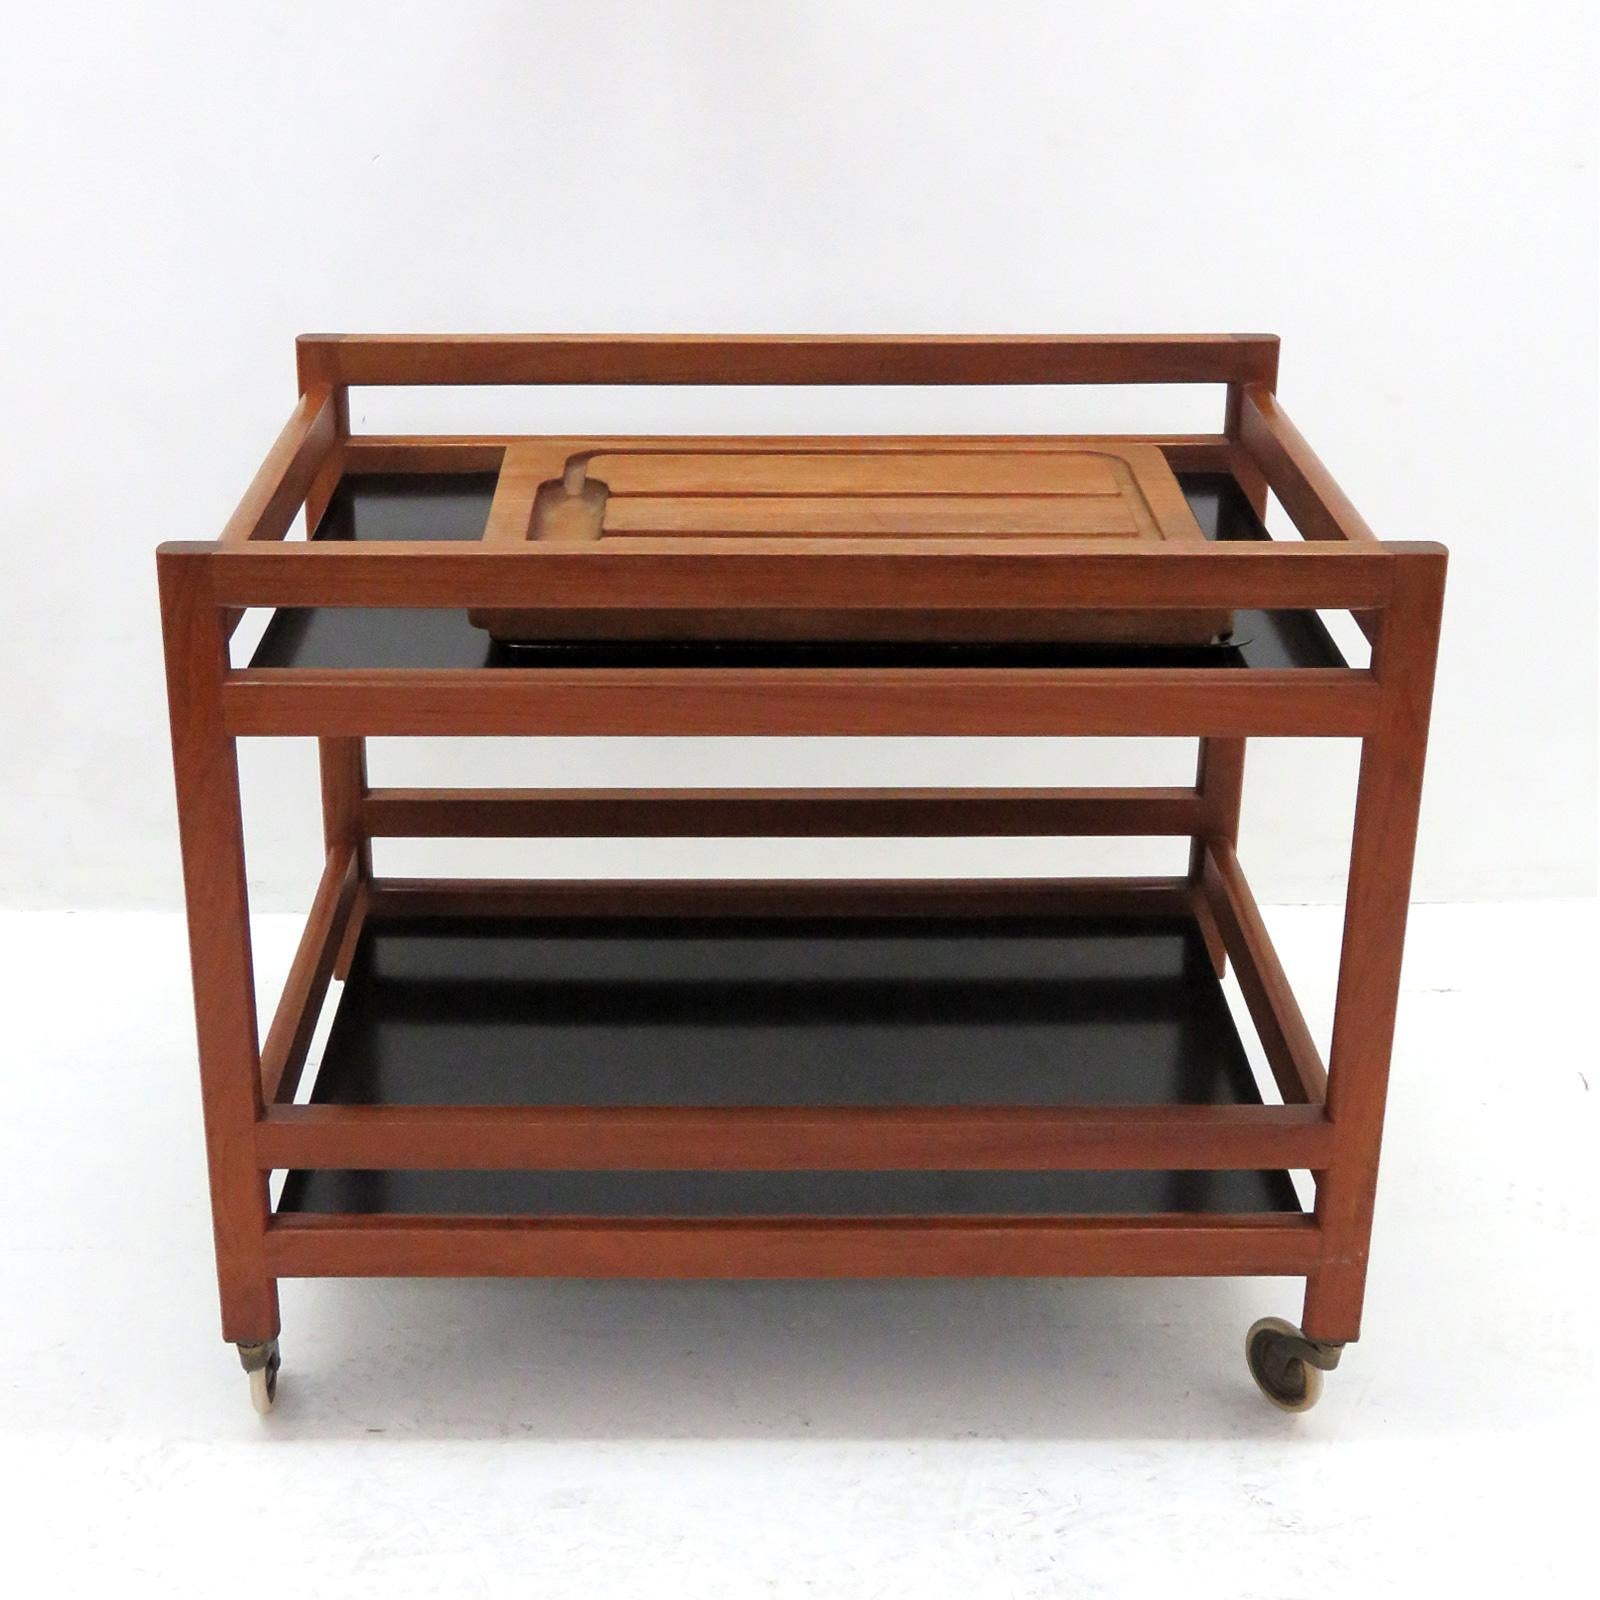 Wonderful serving cart by Børge Mogensen, model no. 5370 for Fredericia Furniture, in teak with black metal trays, a separate metal tray and a cutting board.